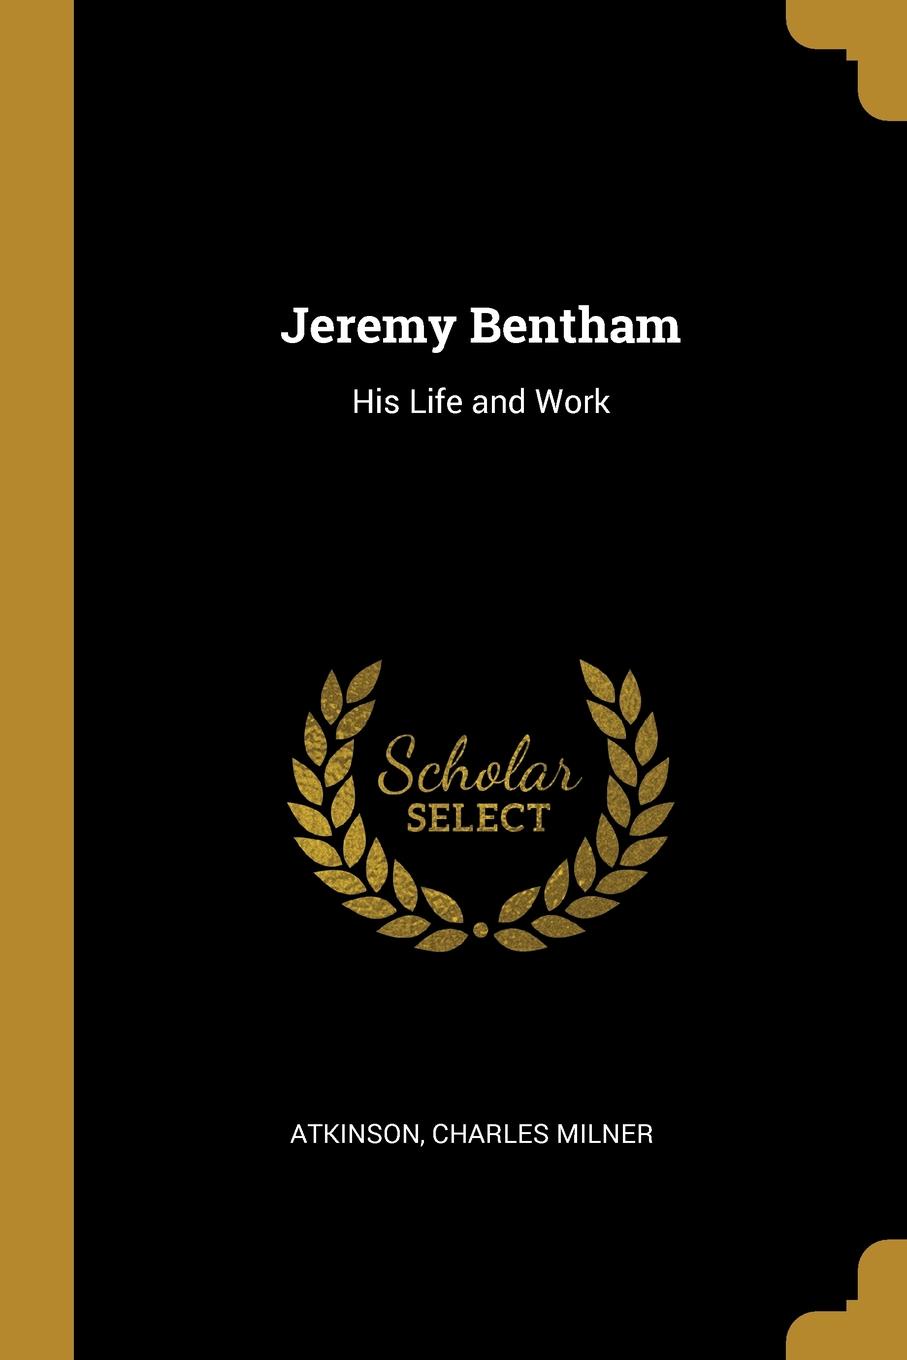 Jeremy Bentham. His Life and Work